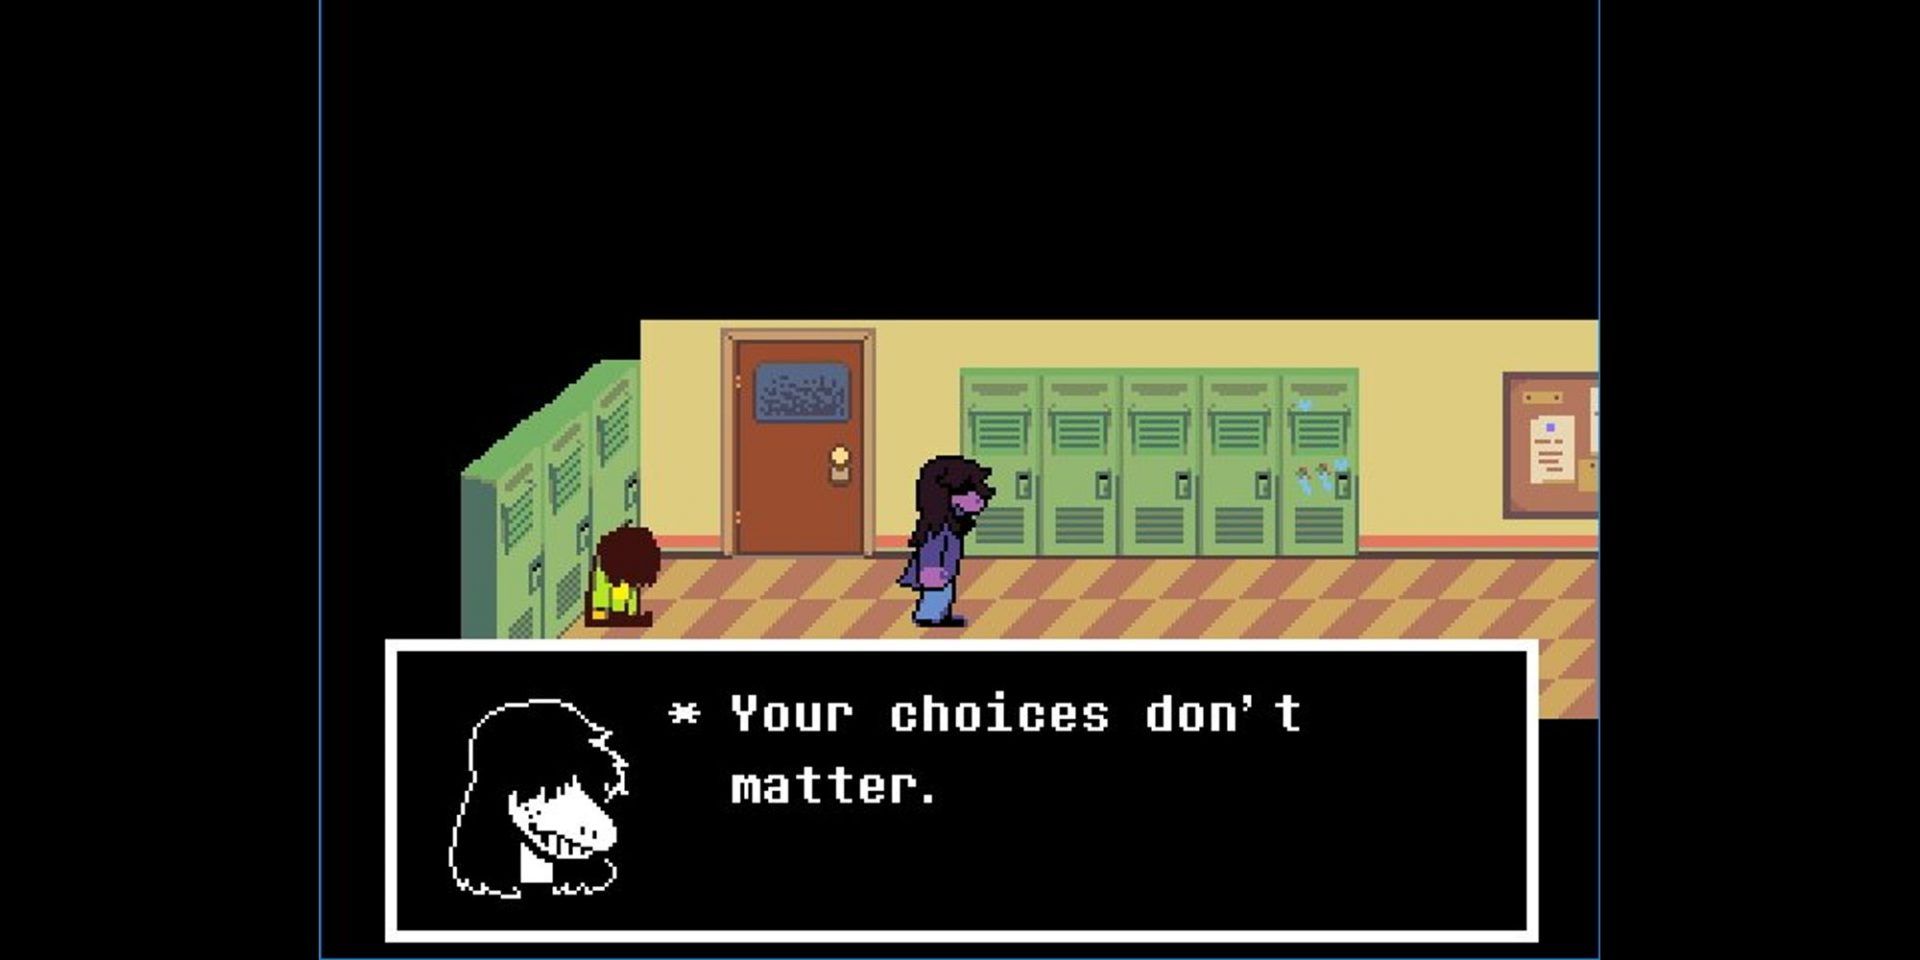 Susie telling Kris that their choices don't matter before they can answer her question outside of their classroom in DELTARUNE.